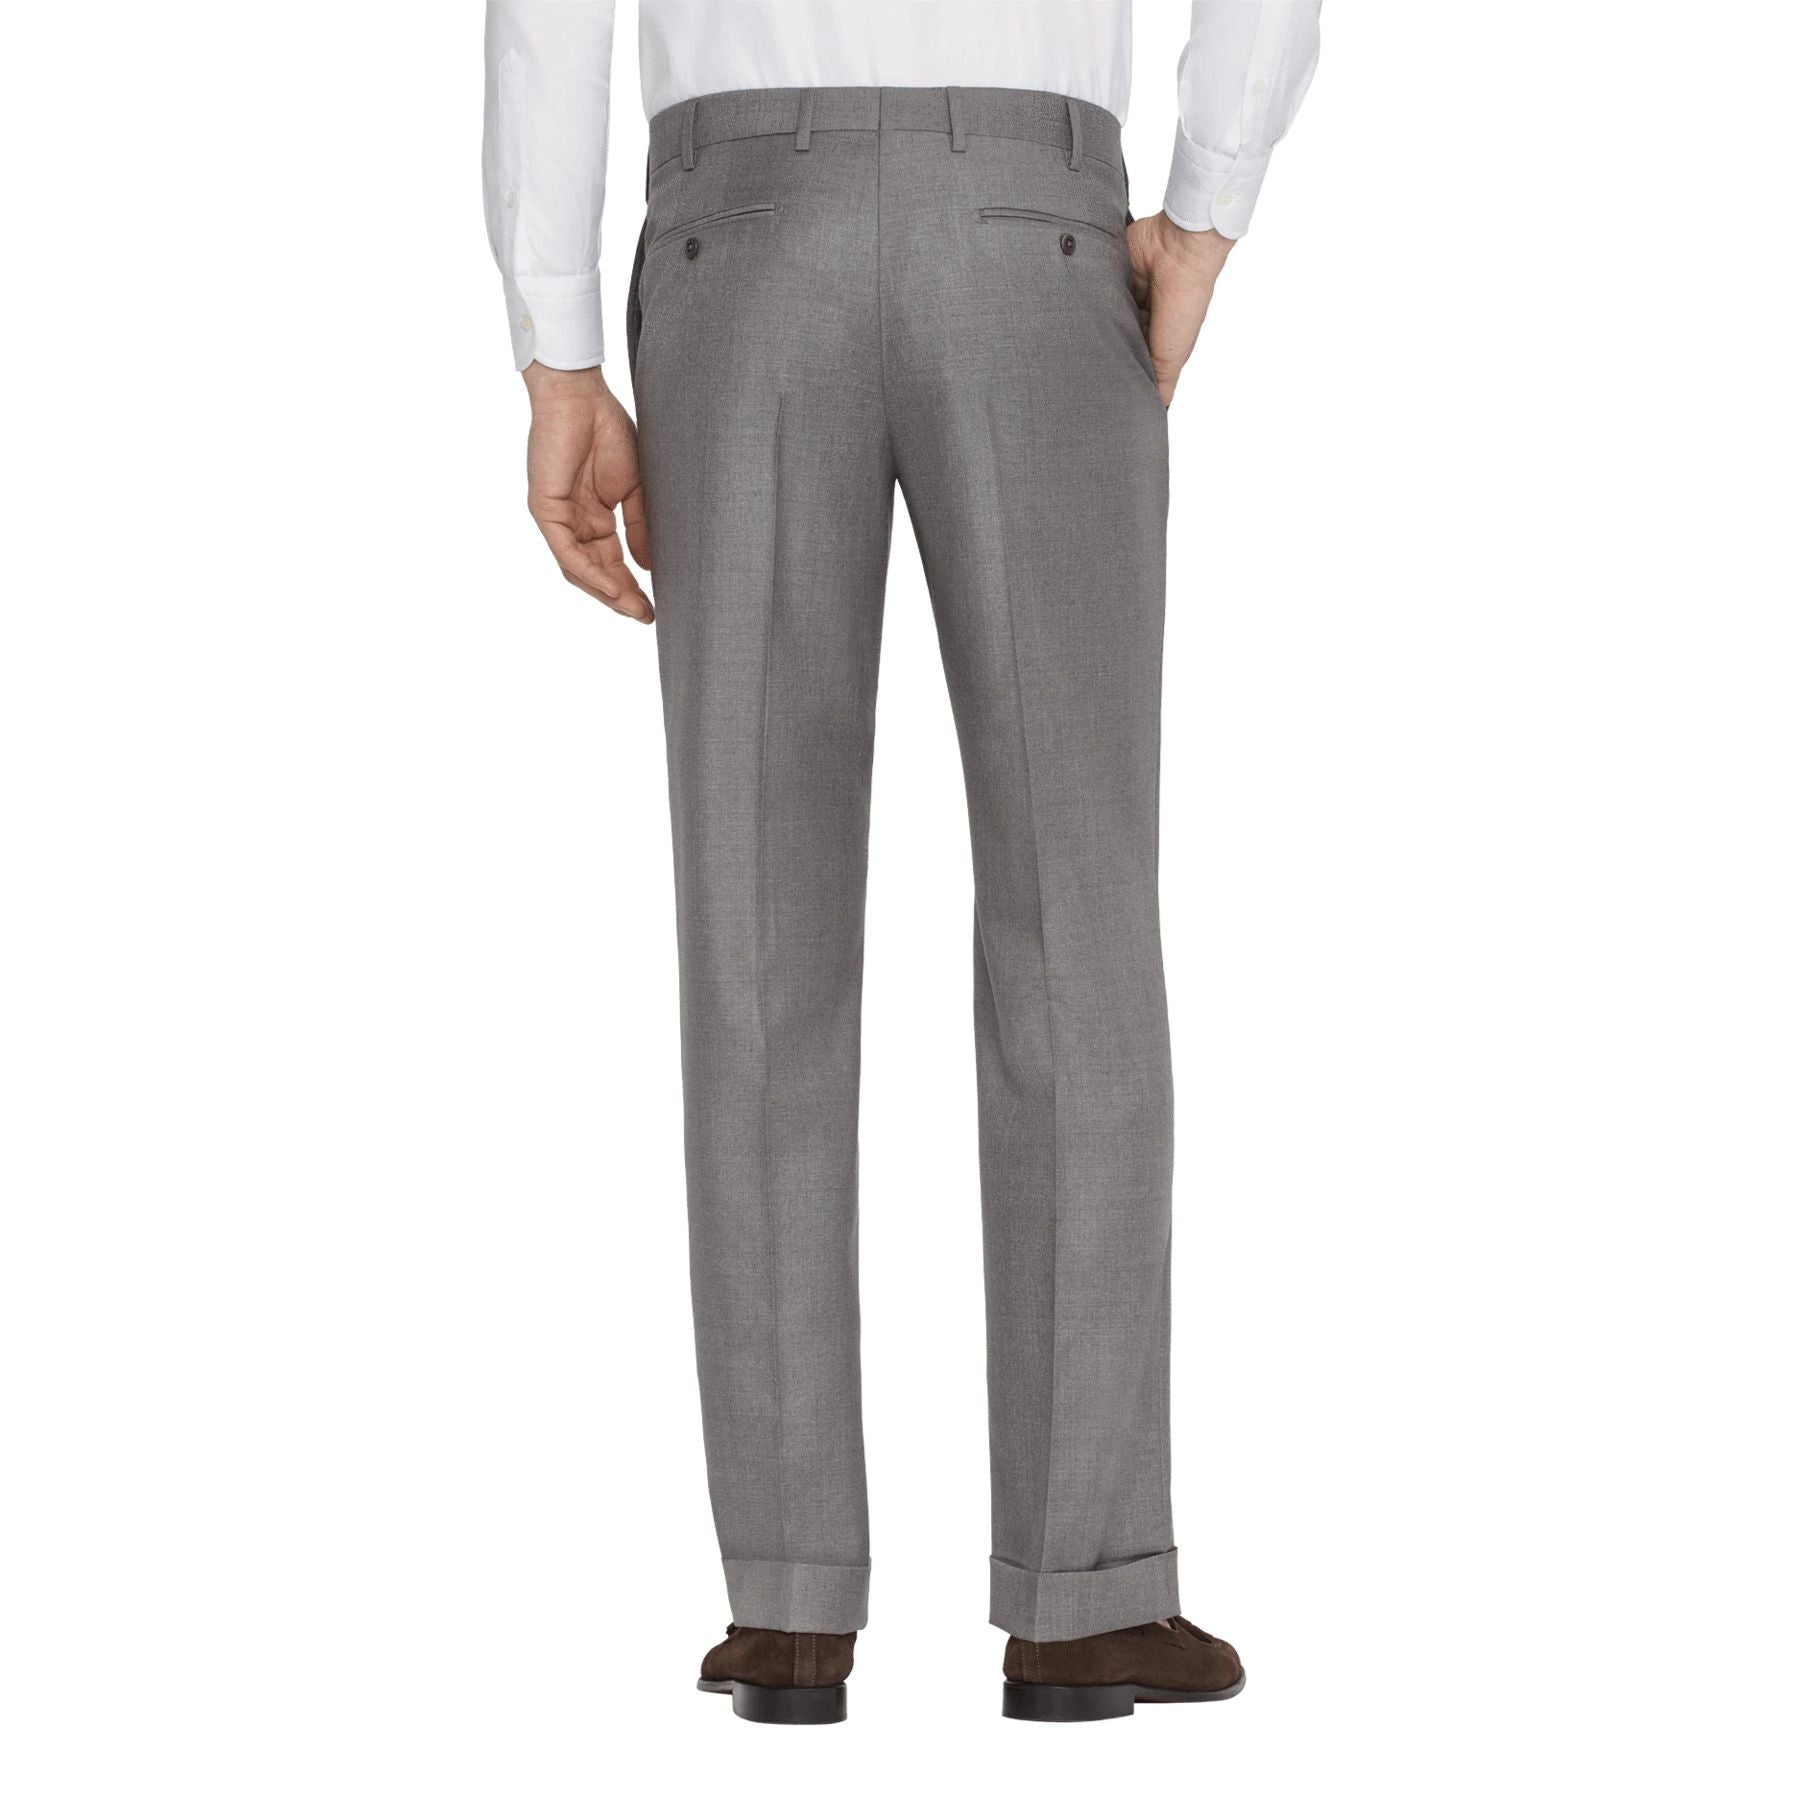 Todd Flat Front Super 120s Wool Serge Trouser in Light Grey (Full Fit) by Zanella